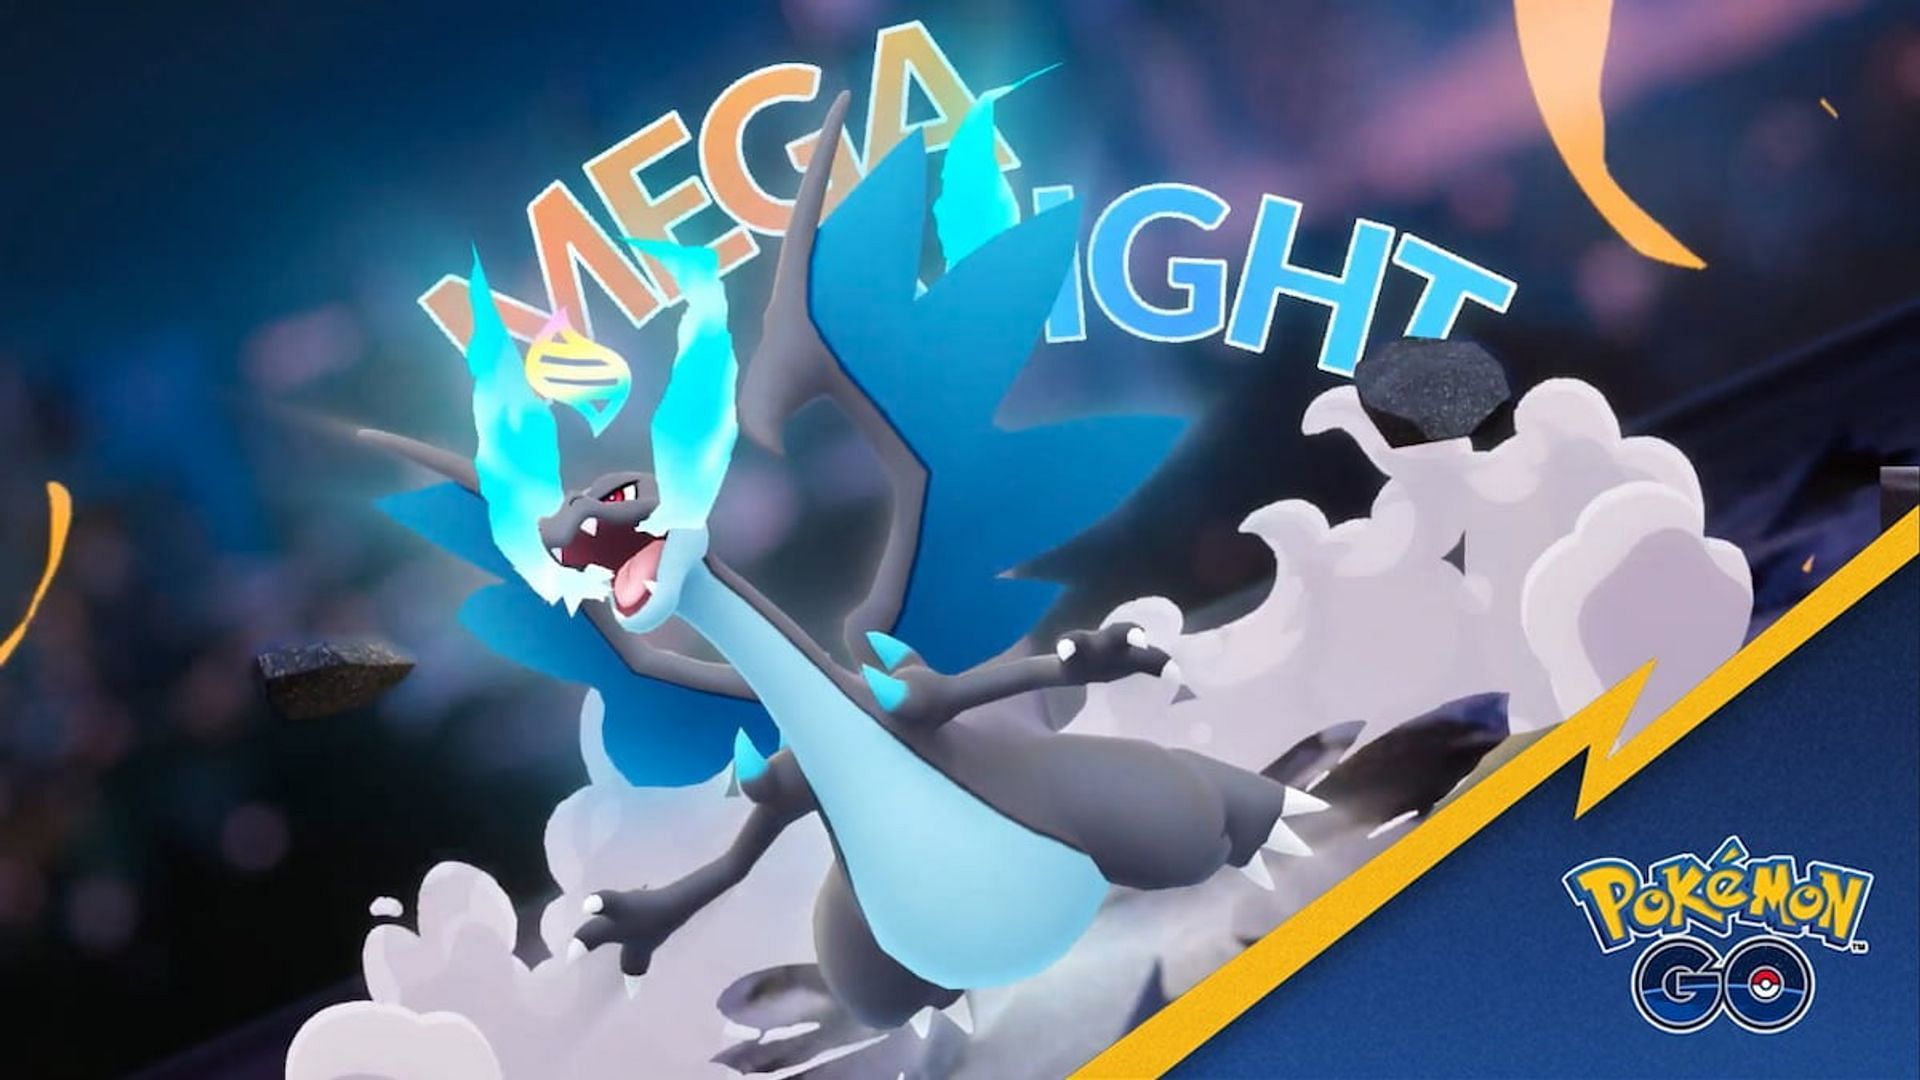 Official imagery promoting the new &quot;A Mega Moment&quot; event for Pokemon GO (Image via Niantic)